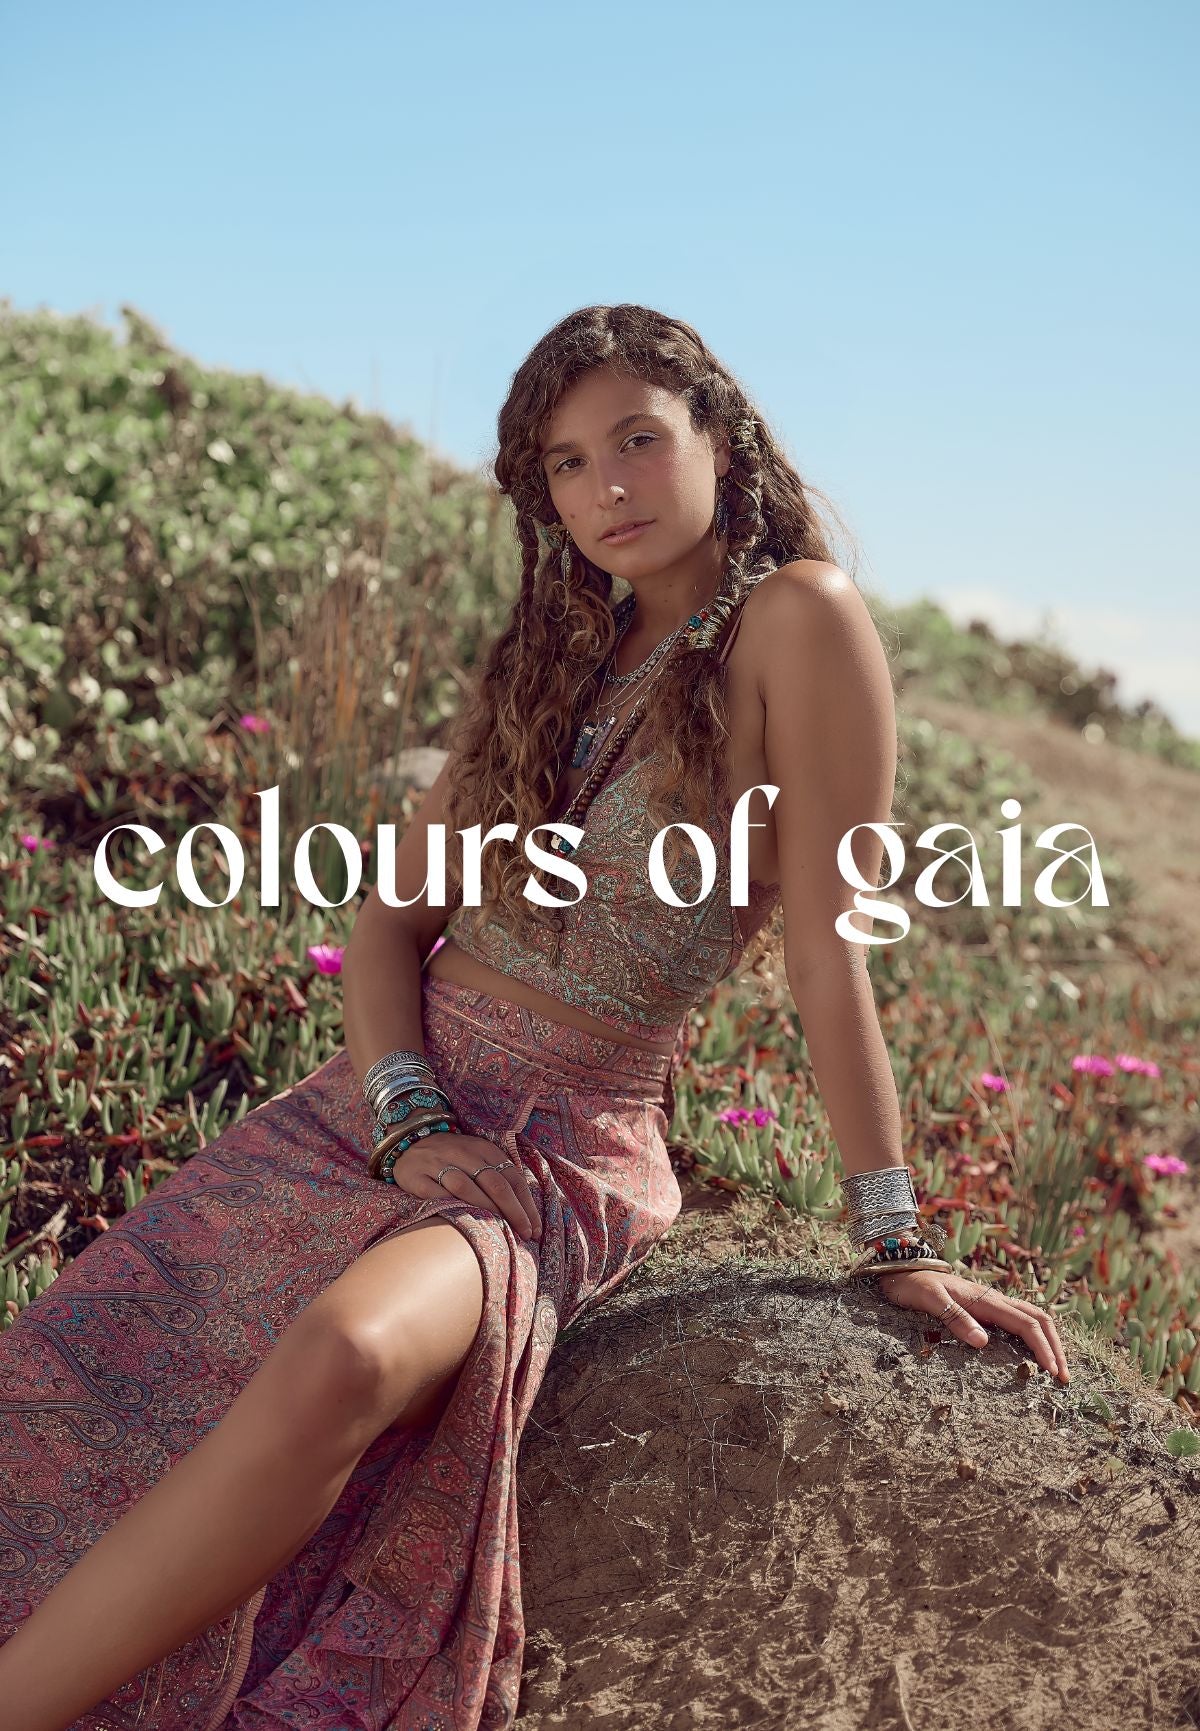 Just landed: Colours of Gaia 🌈